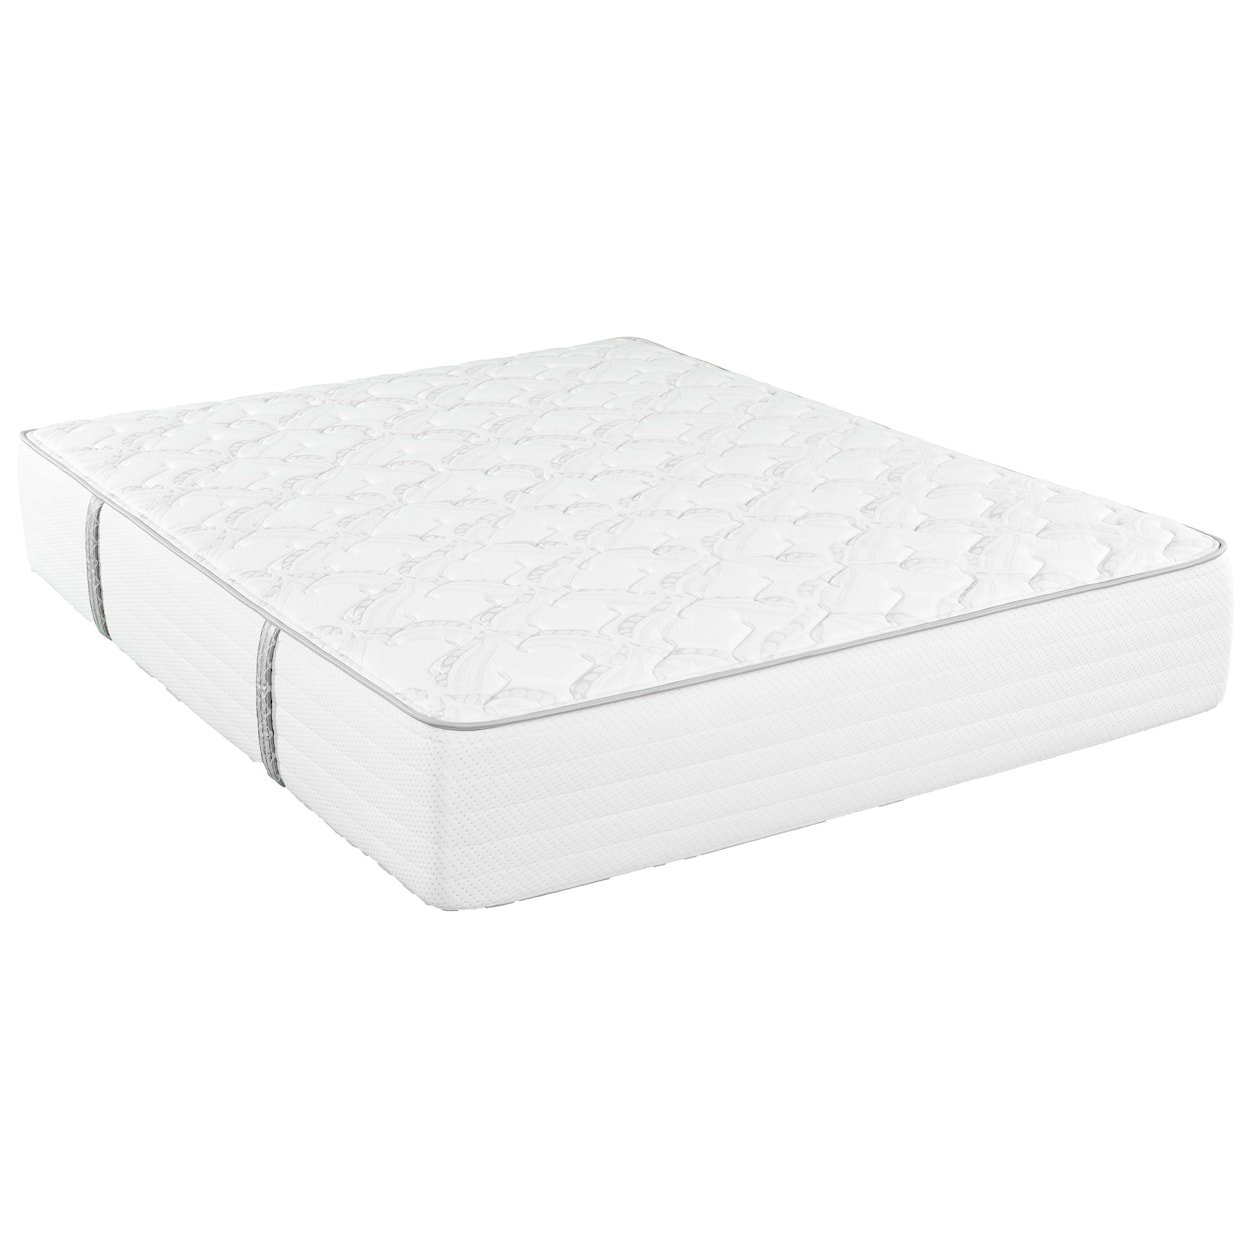 King Koil Kaitlyn Extra Firm Twin Extra Firm Mattress